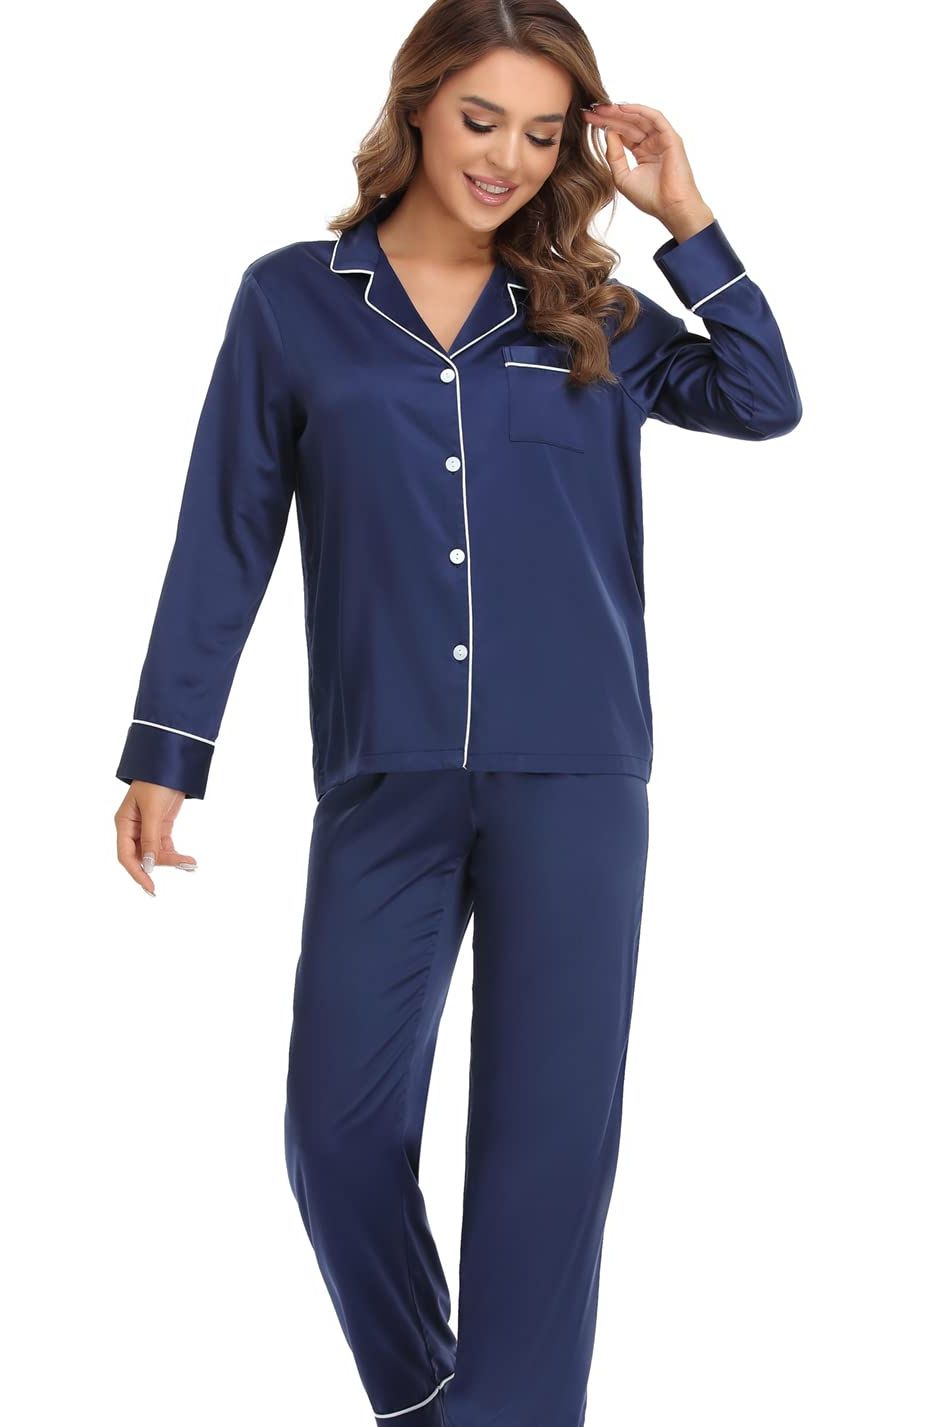 The 25 Best Pajamas for Women That Are So Cute